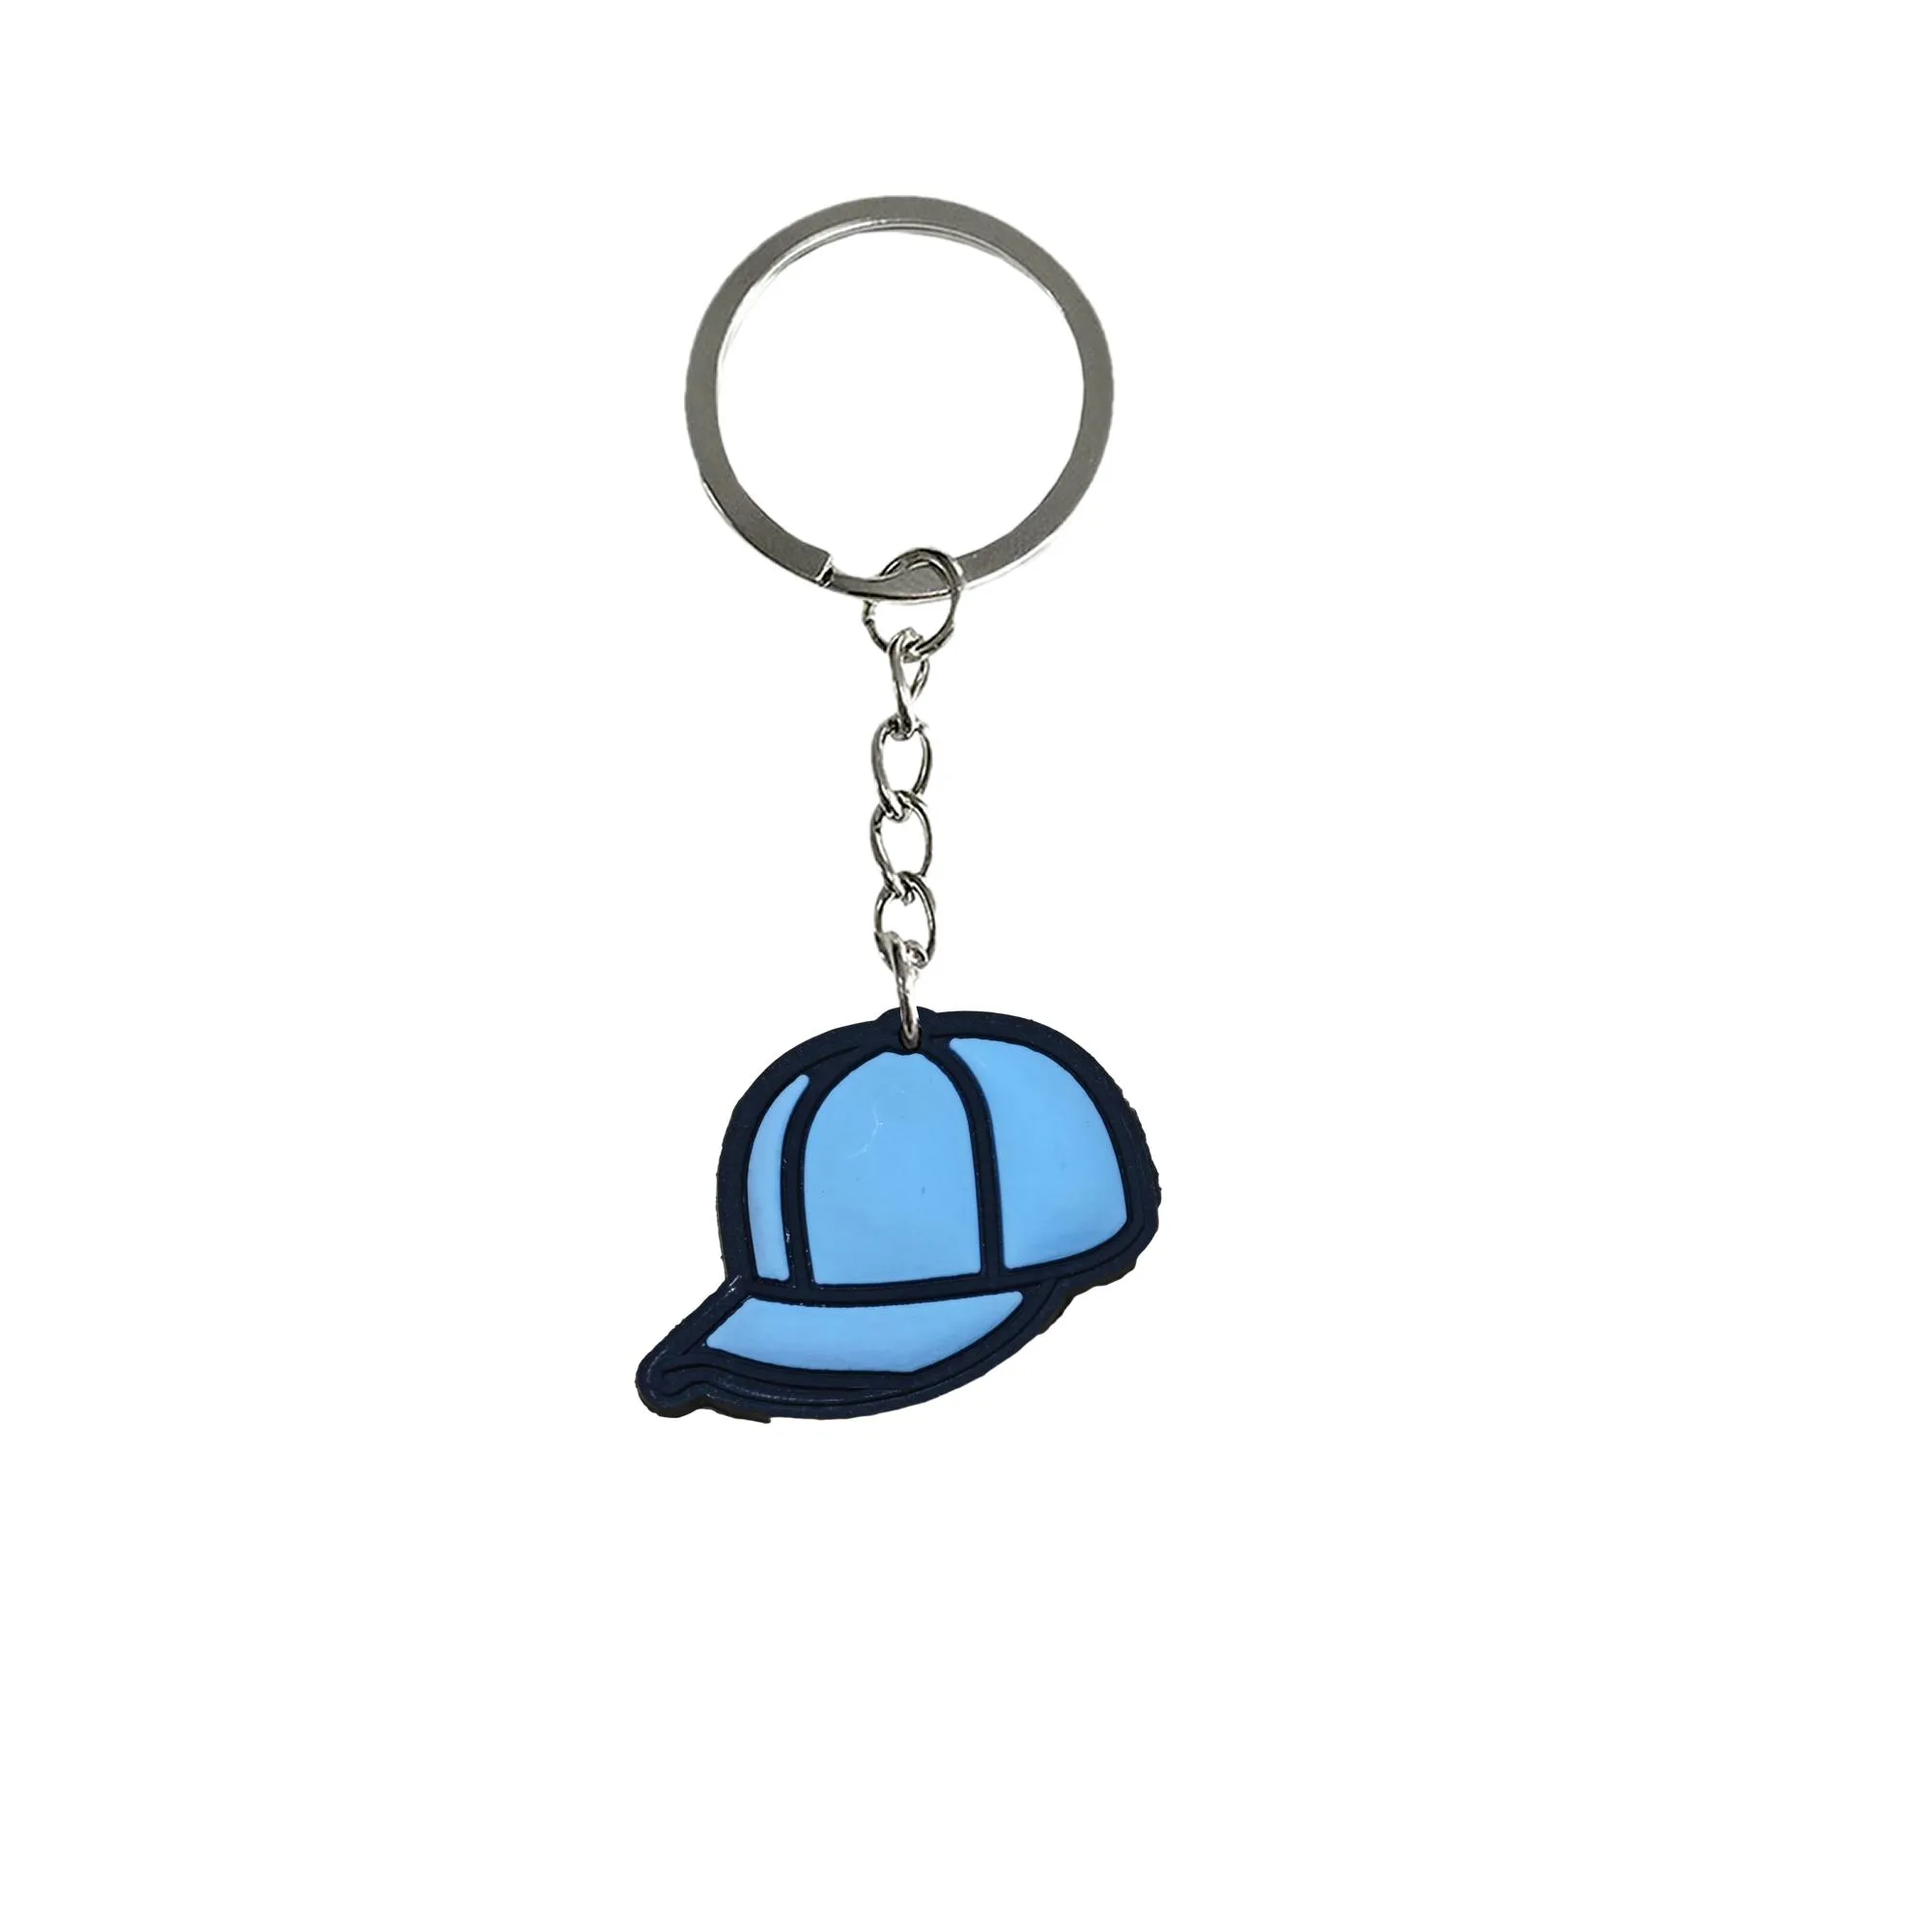 hat keychain keychains party favors key chain accessories for backpack handbag and car gift valentines day keyring men suitable schoolbag women ring bag